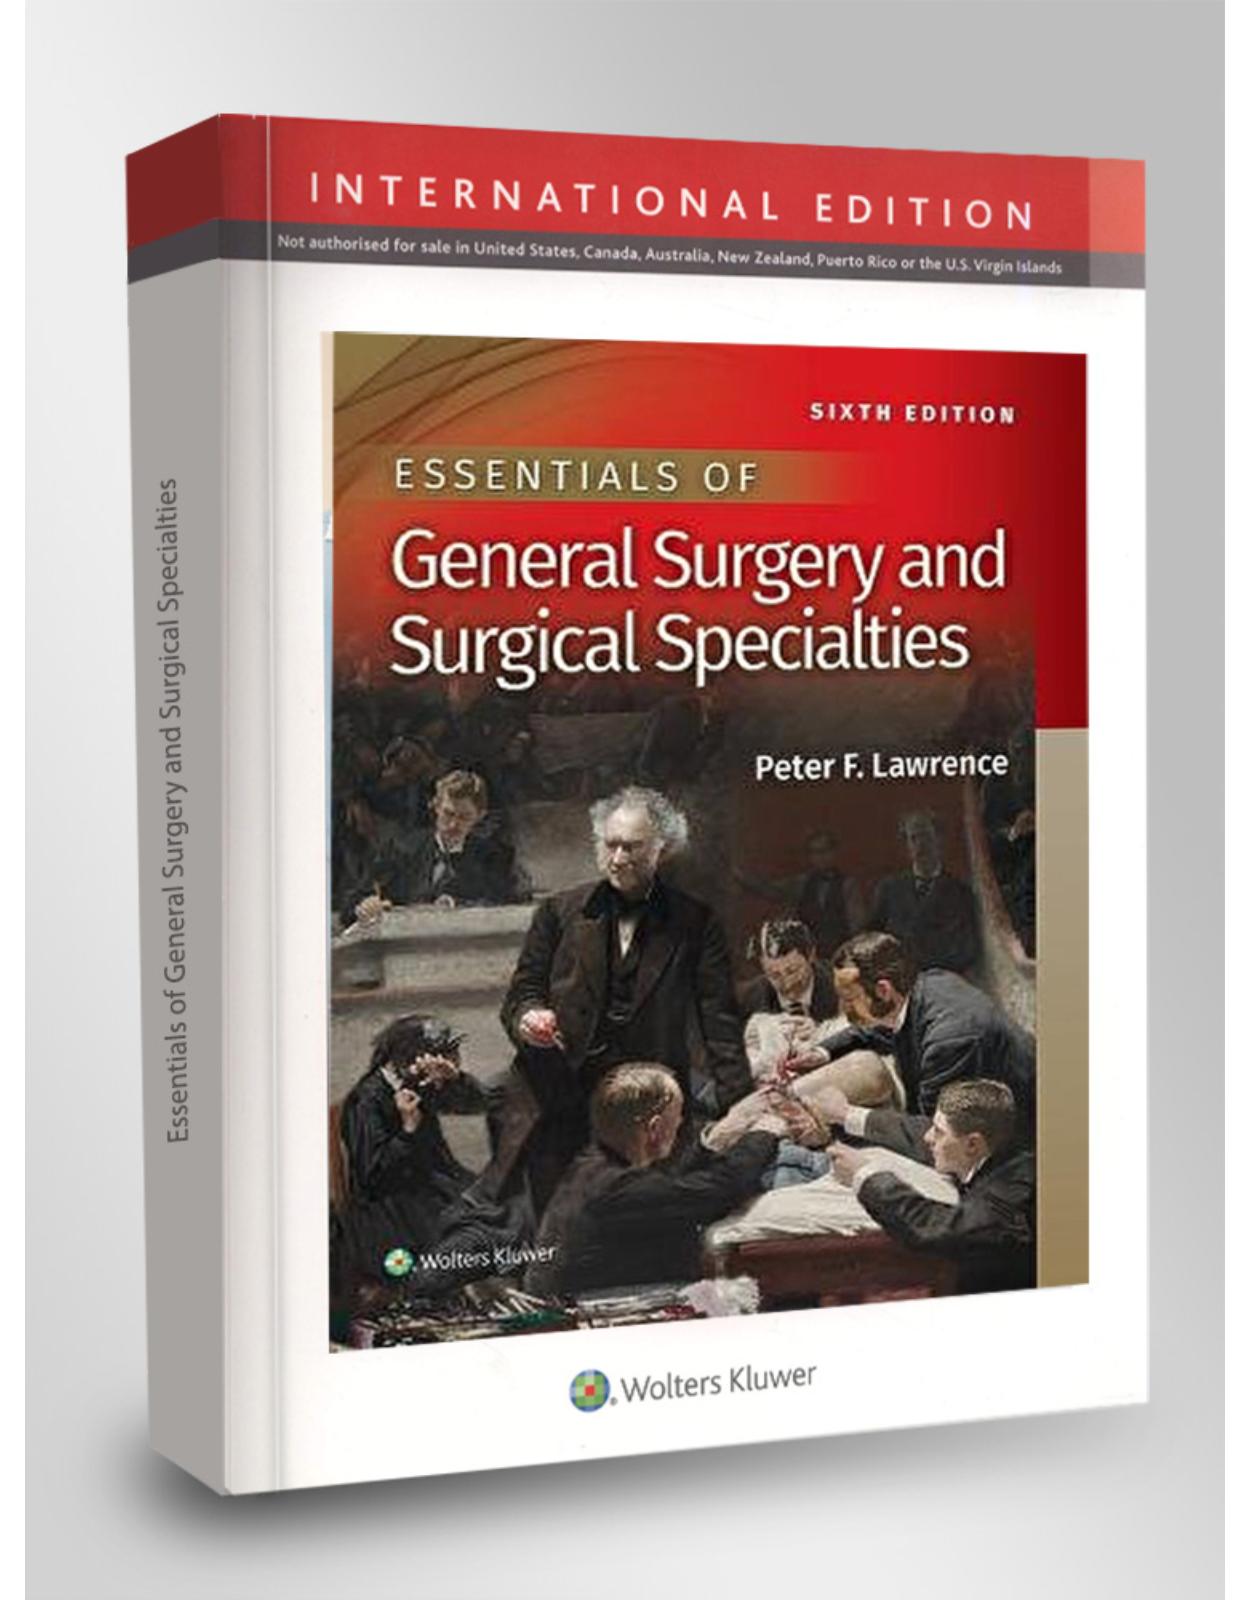 Essentials of General Surgery and Surgical Specialties 